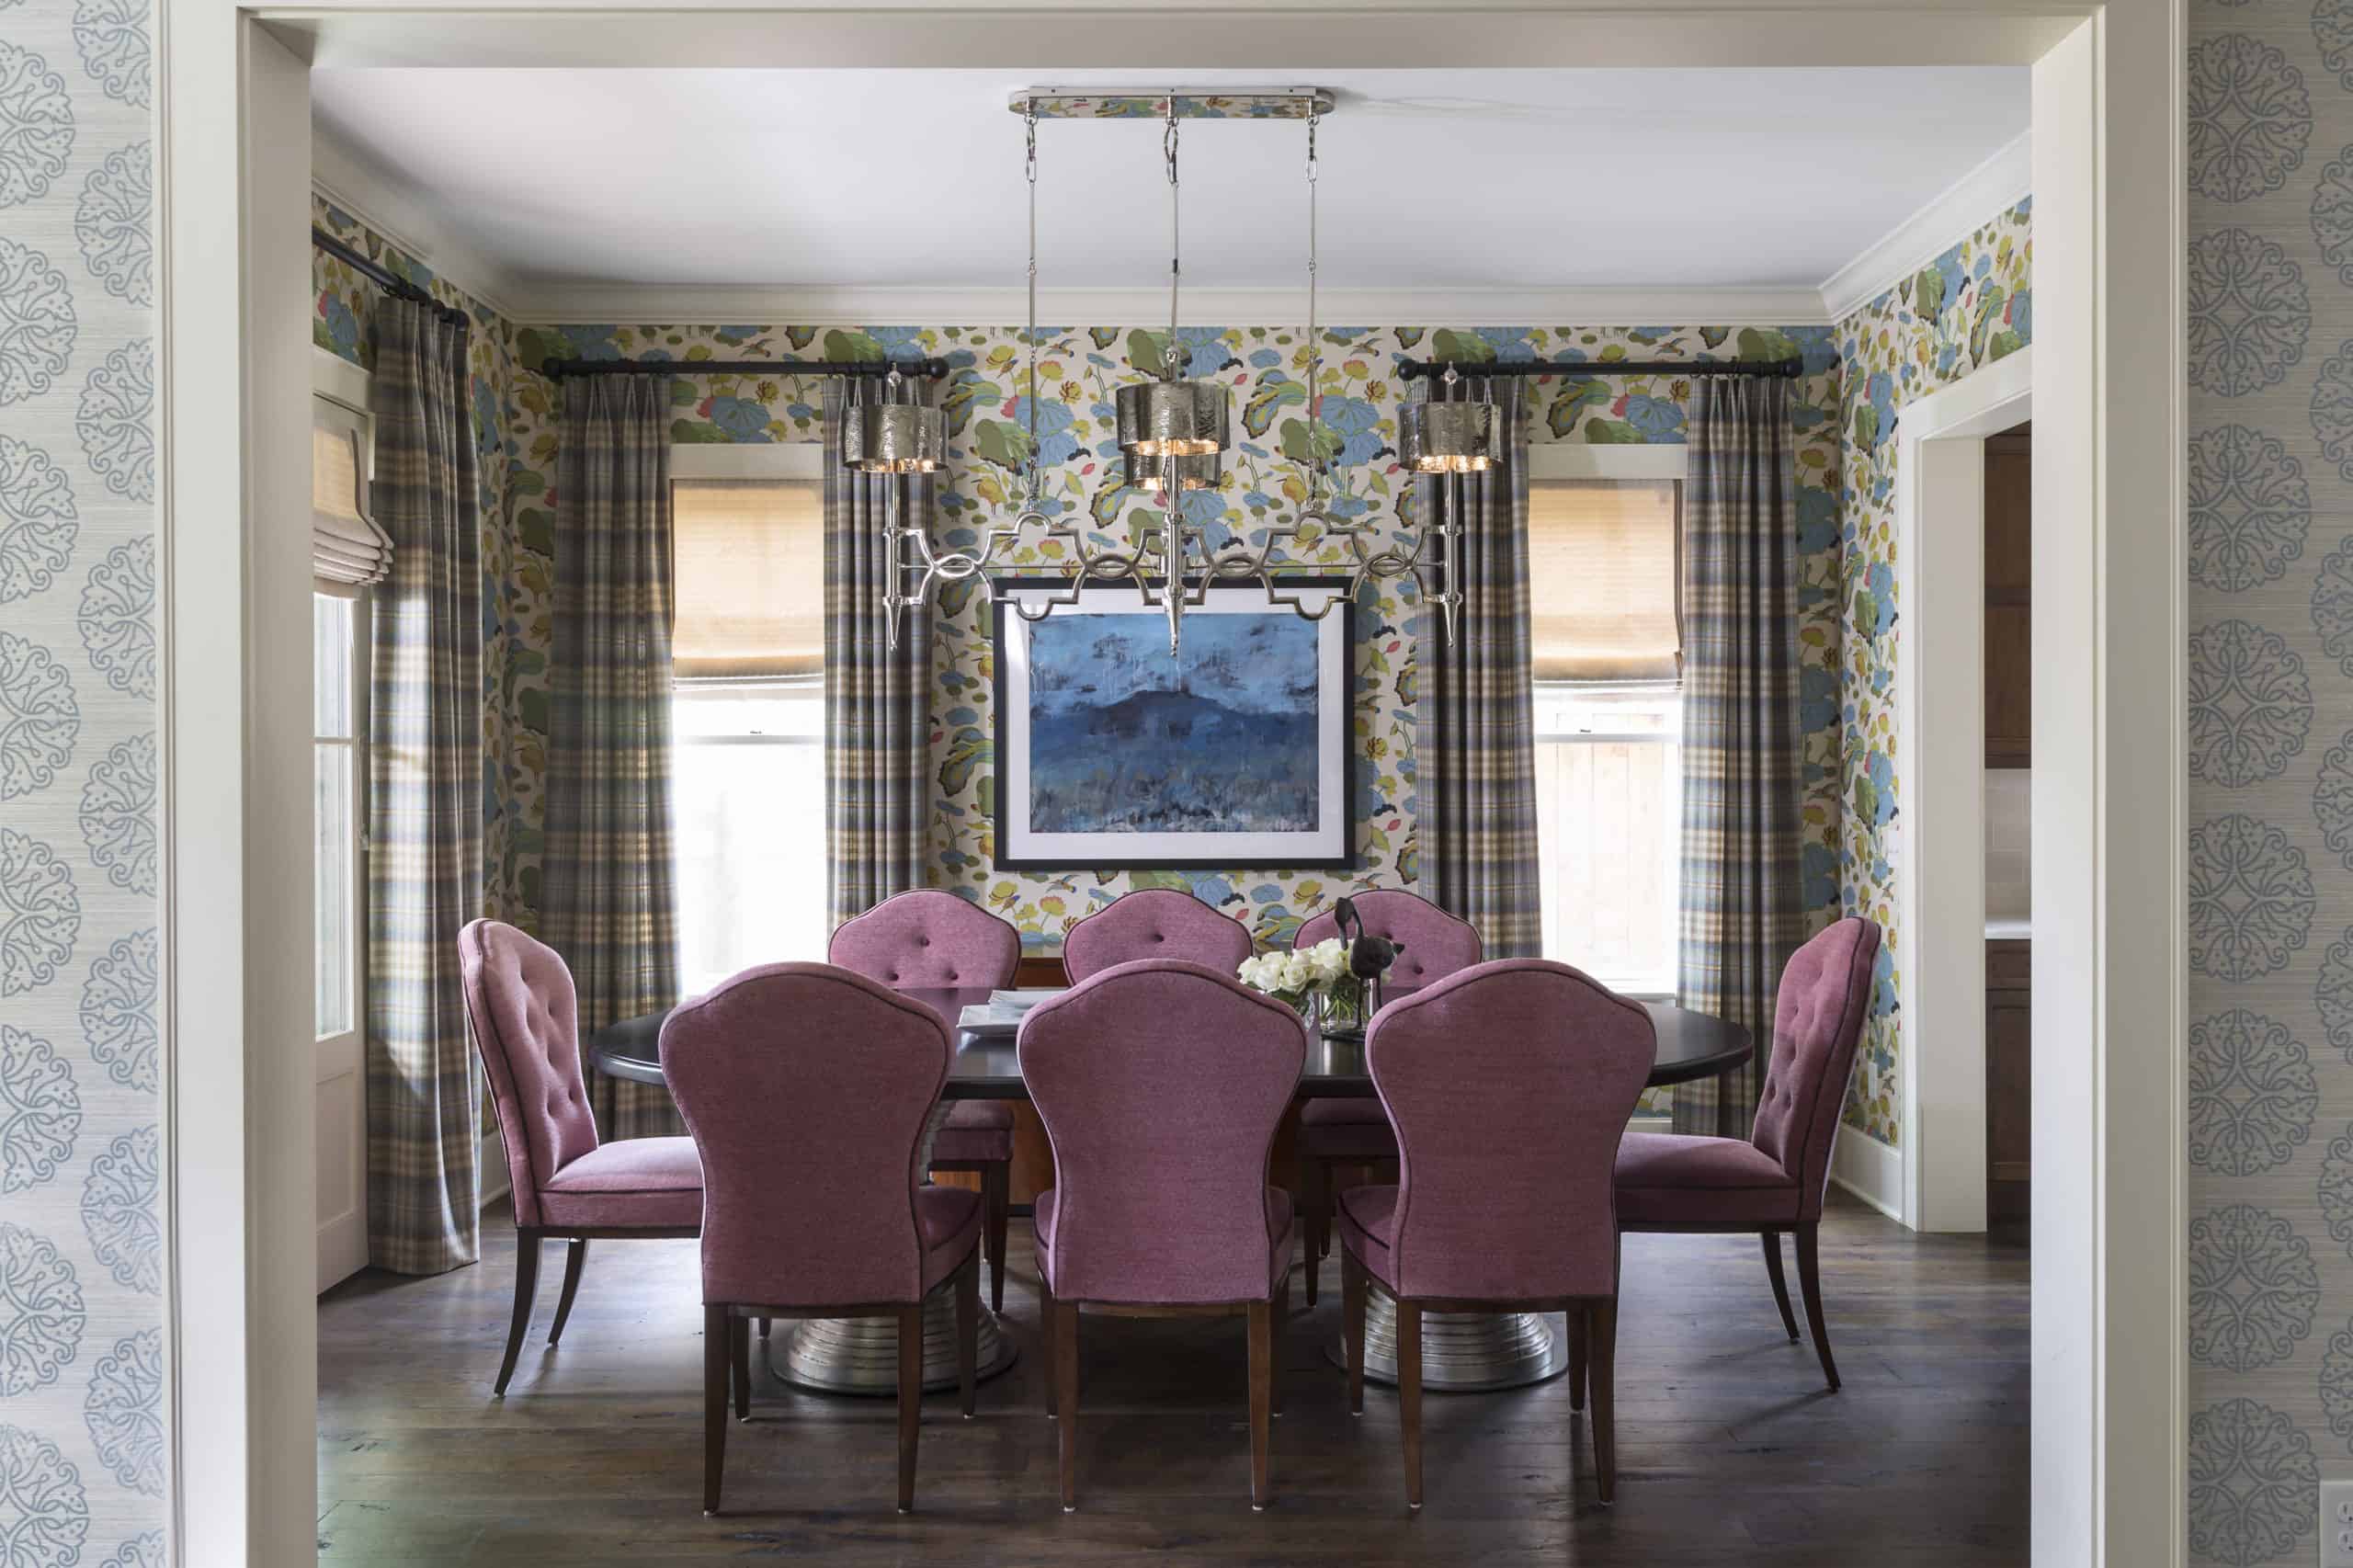 Dramatic Dining Room Chandelier and Pink Dining Chairs